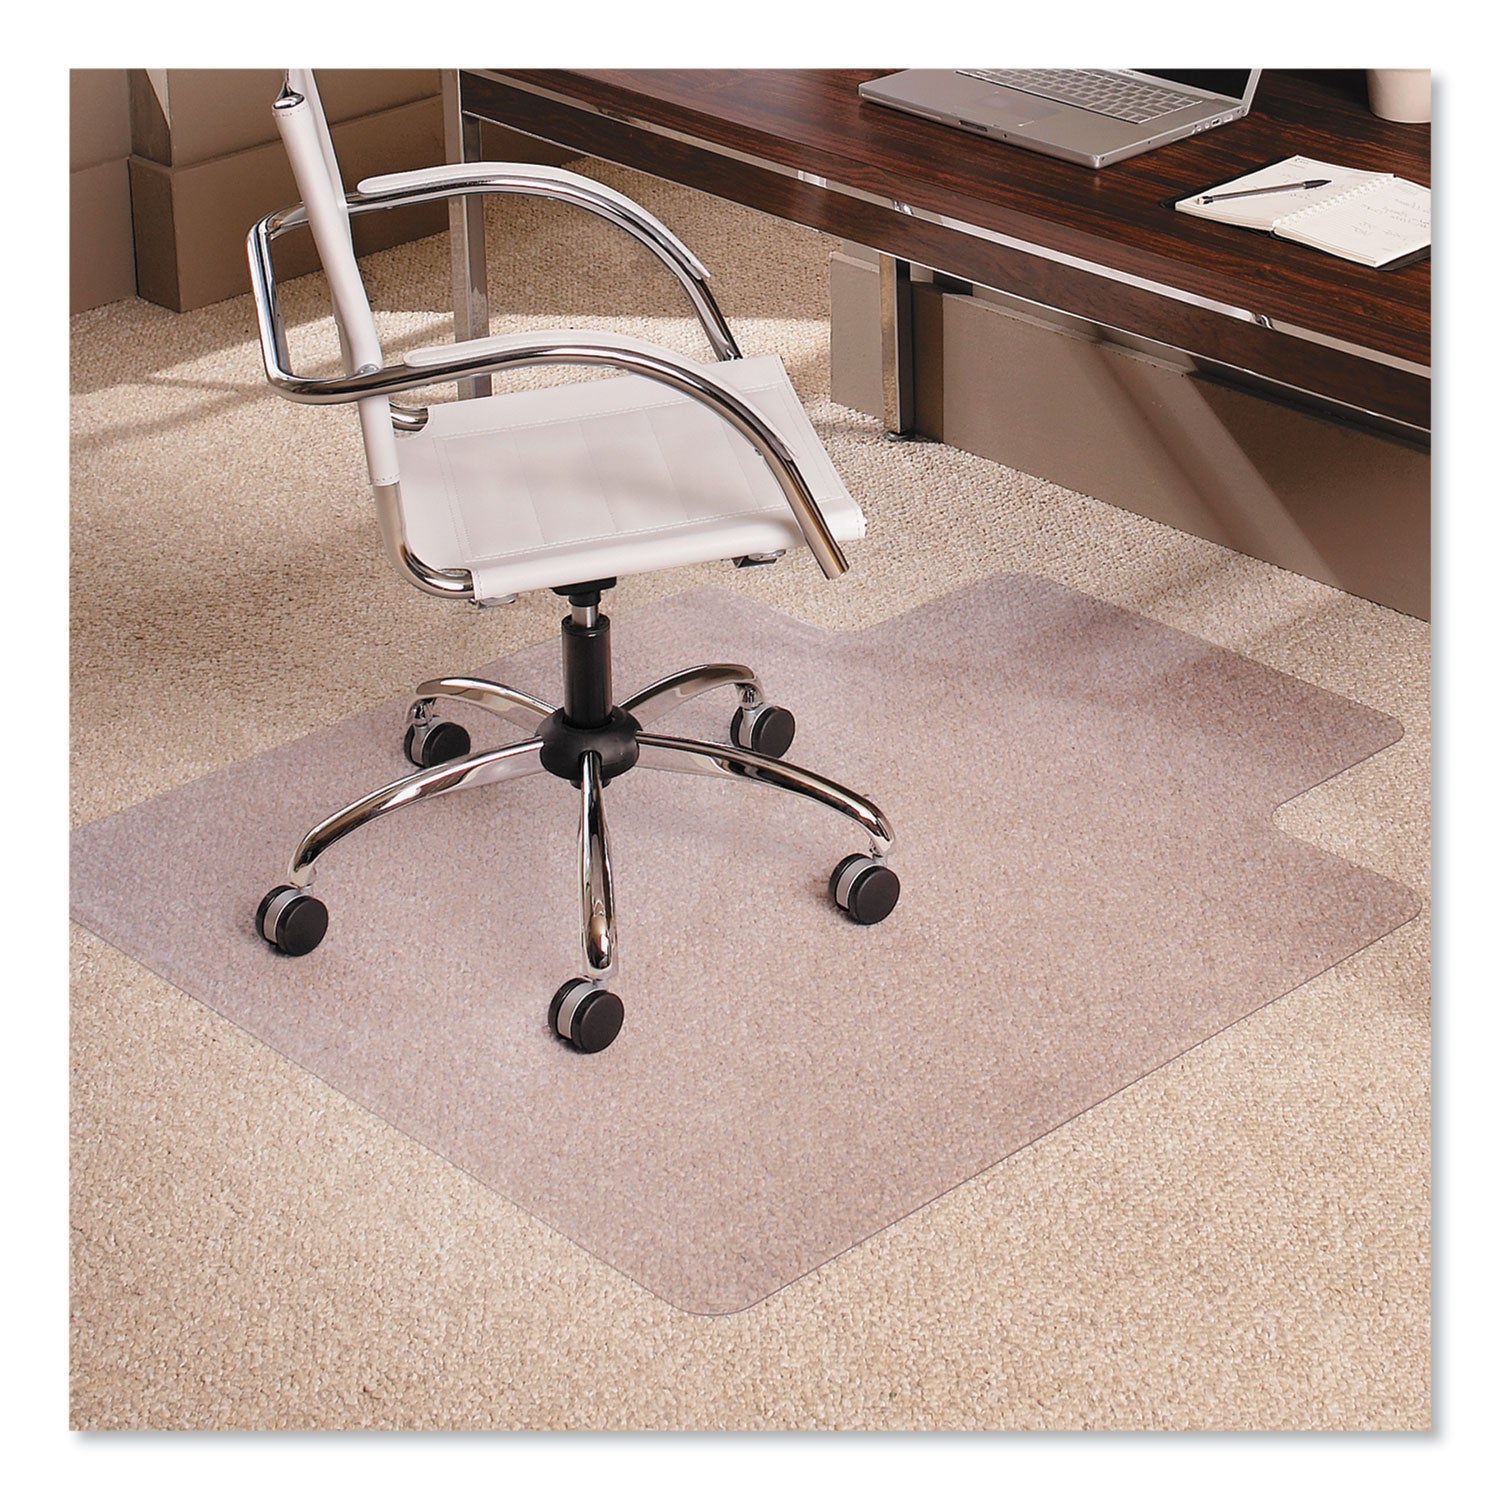 EverLife Moderate Use Chair Mat for Low Pile Carpet, Rectangular with Lip, 36 x 48, Clear - 1